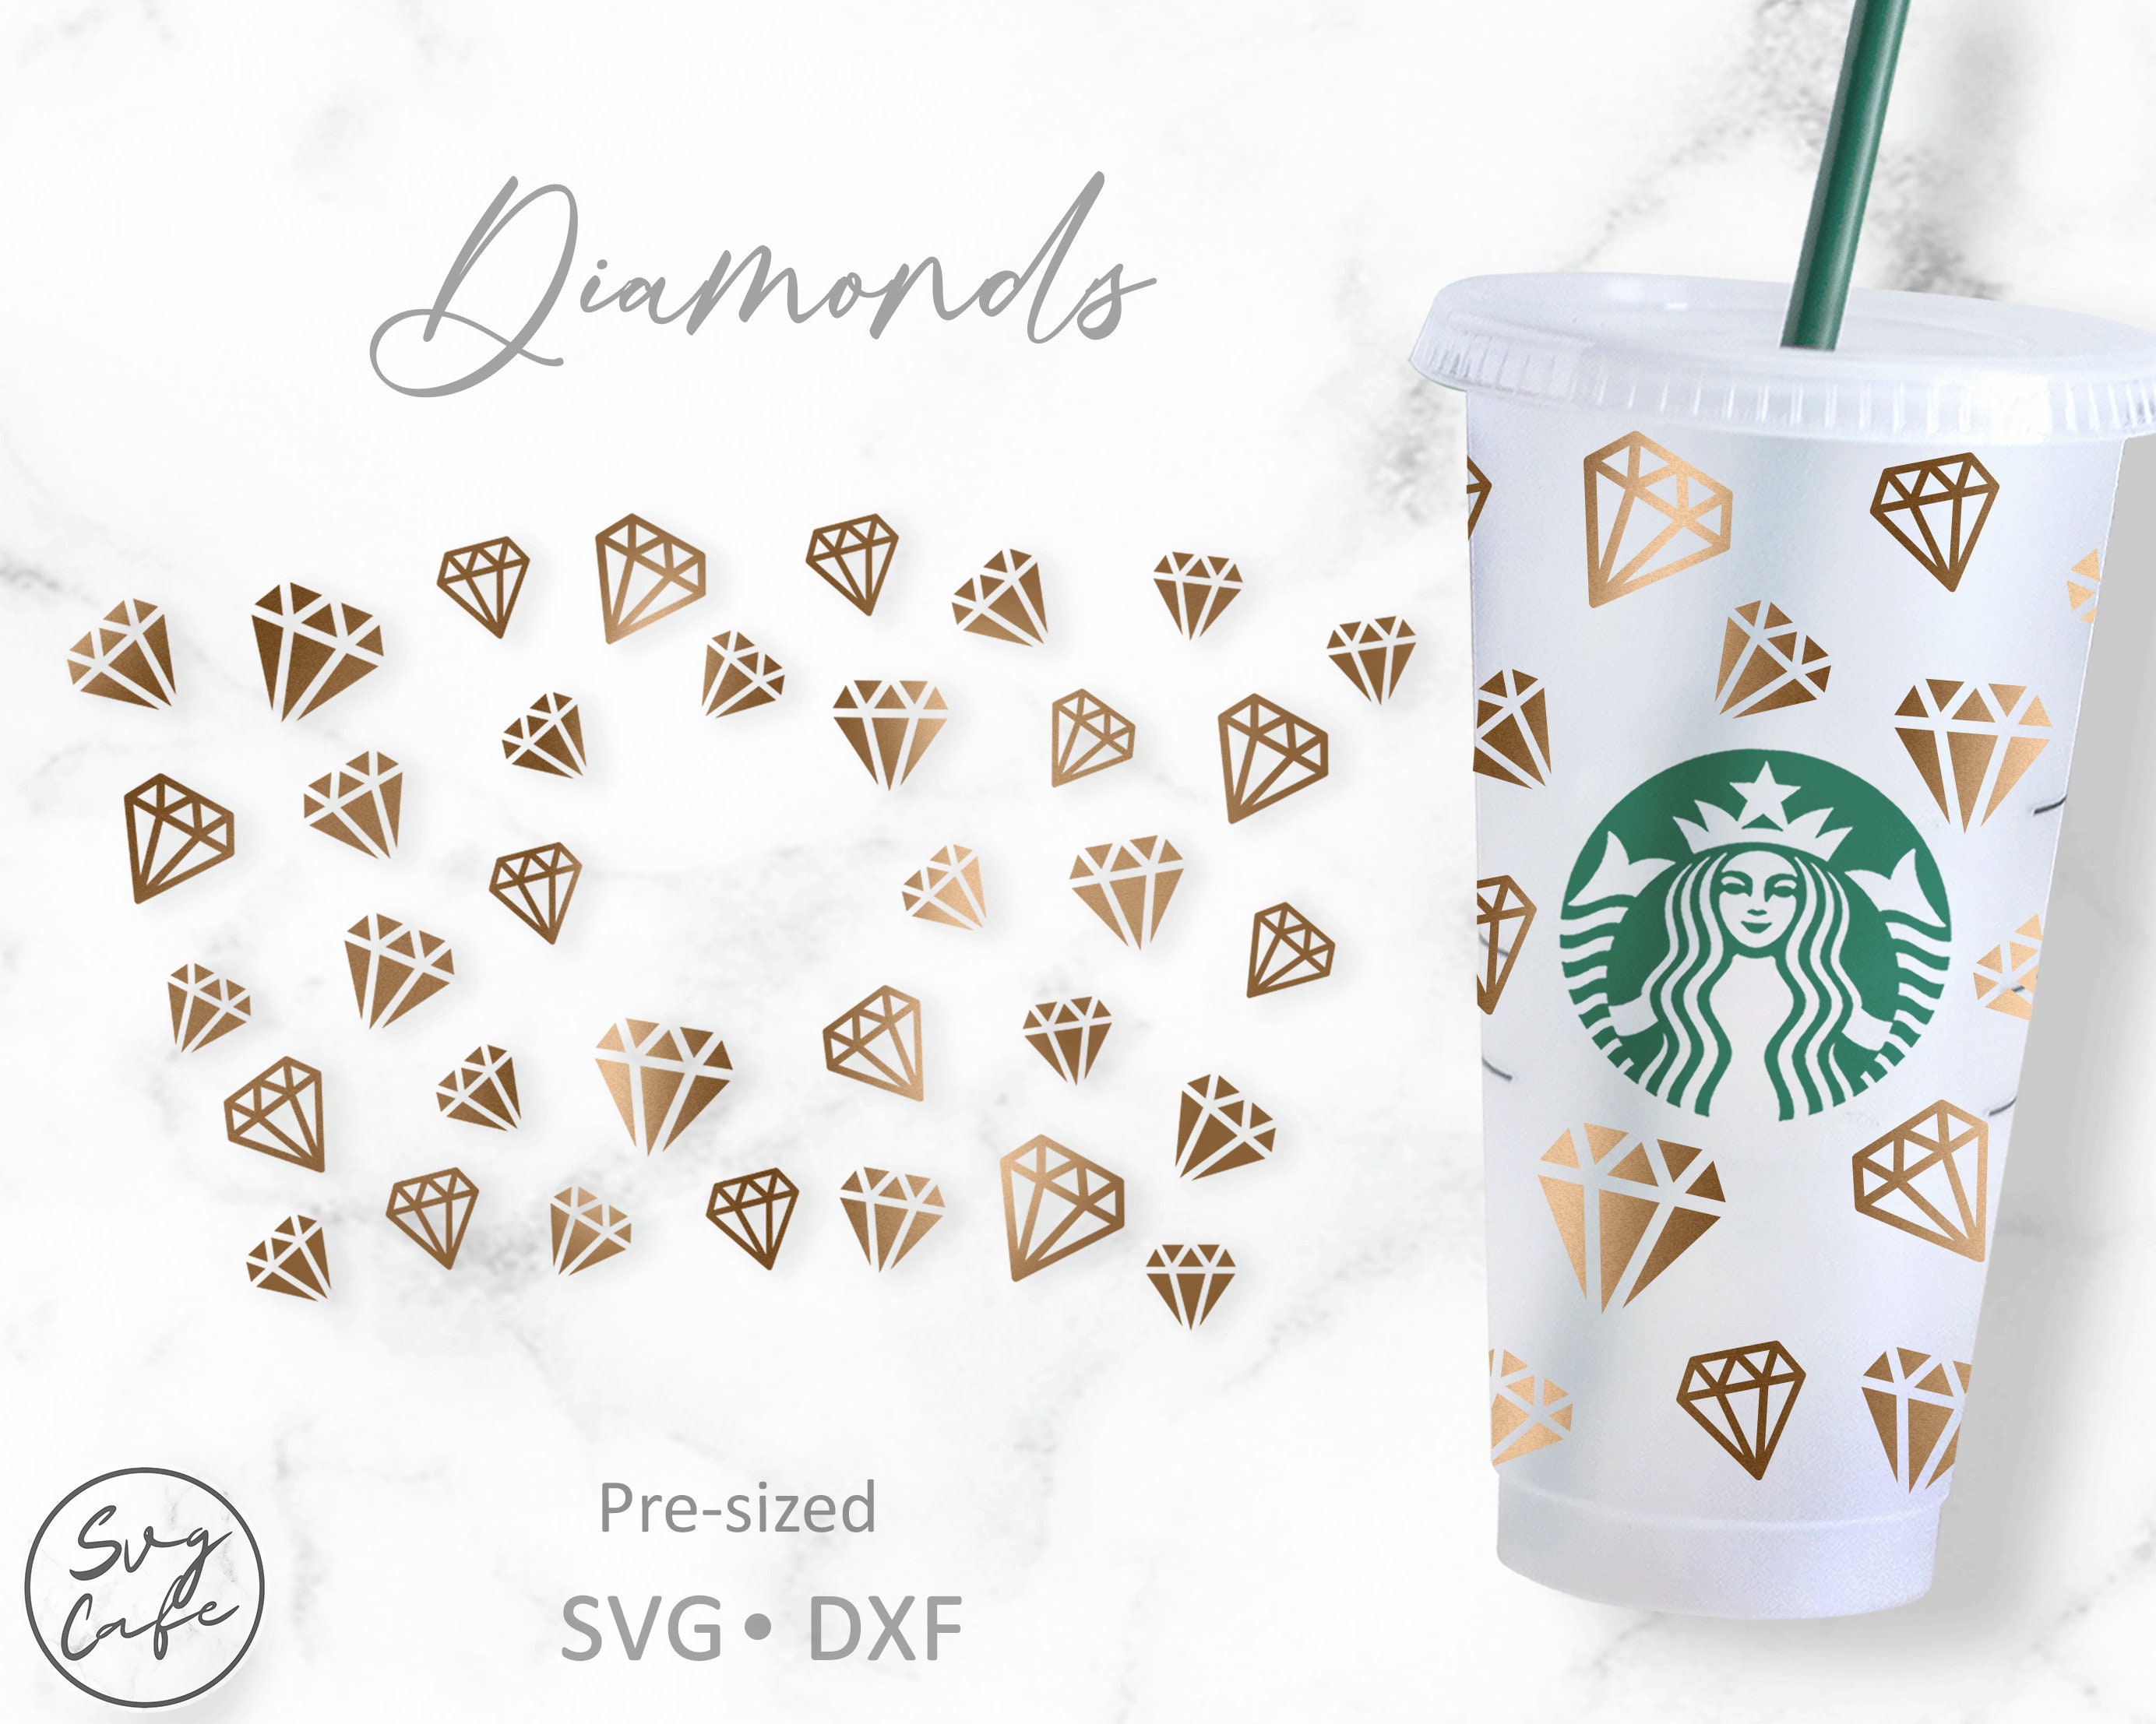 24oz Venti Cold Cup Diamonds for Starbucks Cup, Svg Dxf Png File Digital  Download